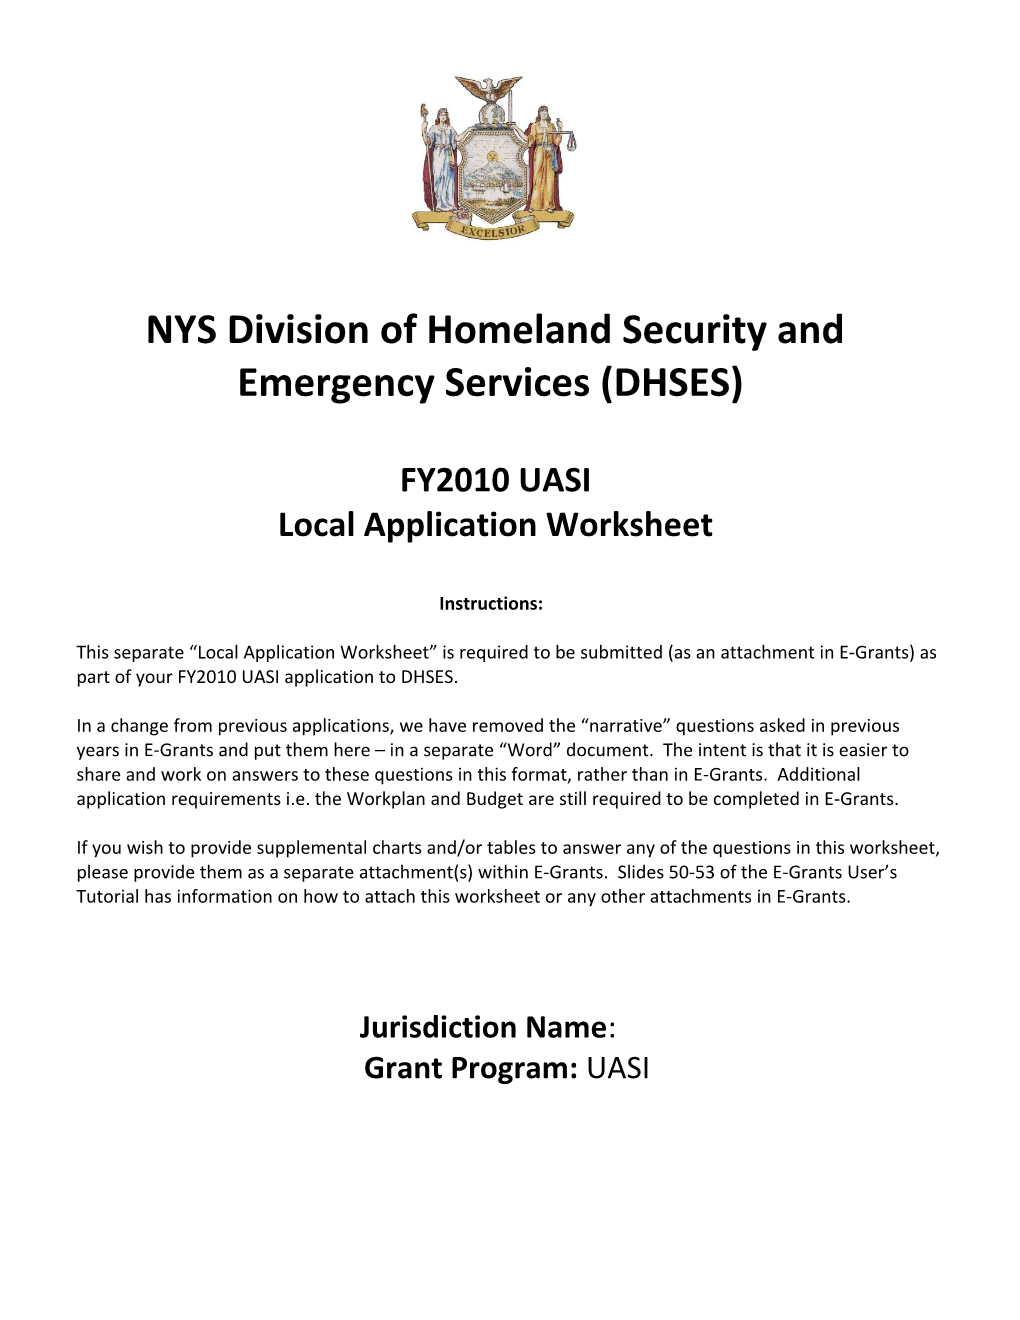 NYS Division of Homeland Security and Emergency Services (DHSES)